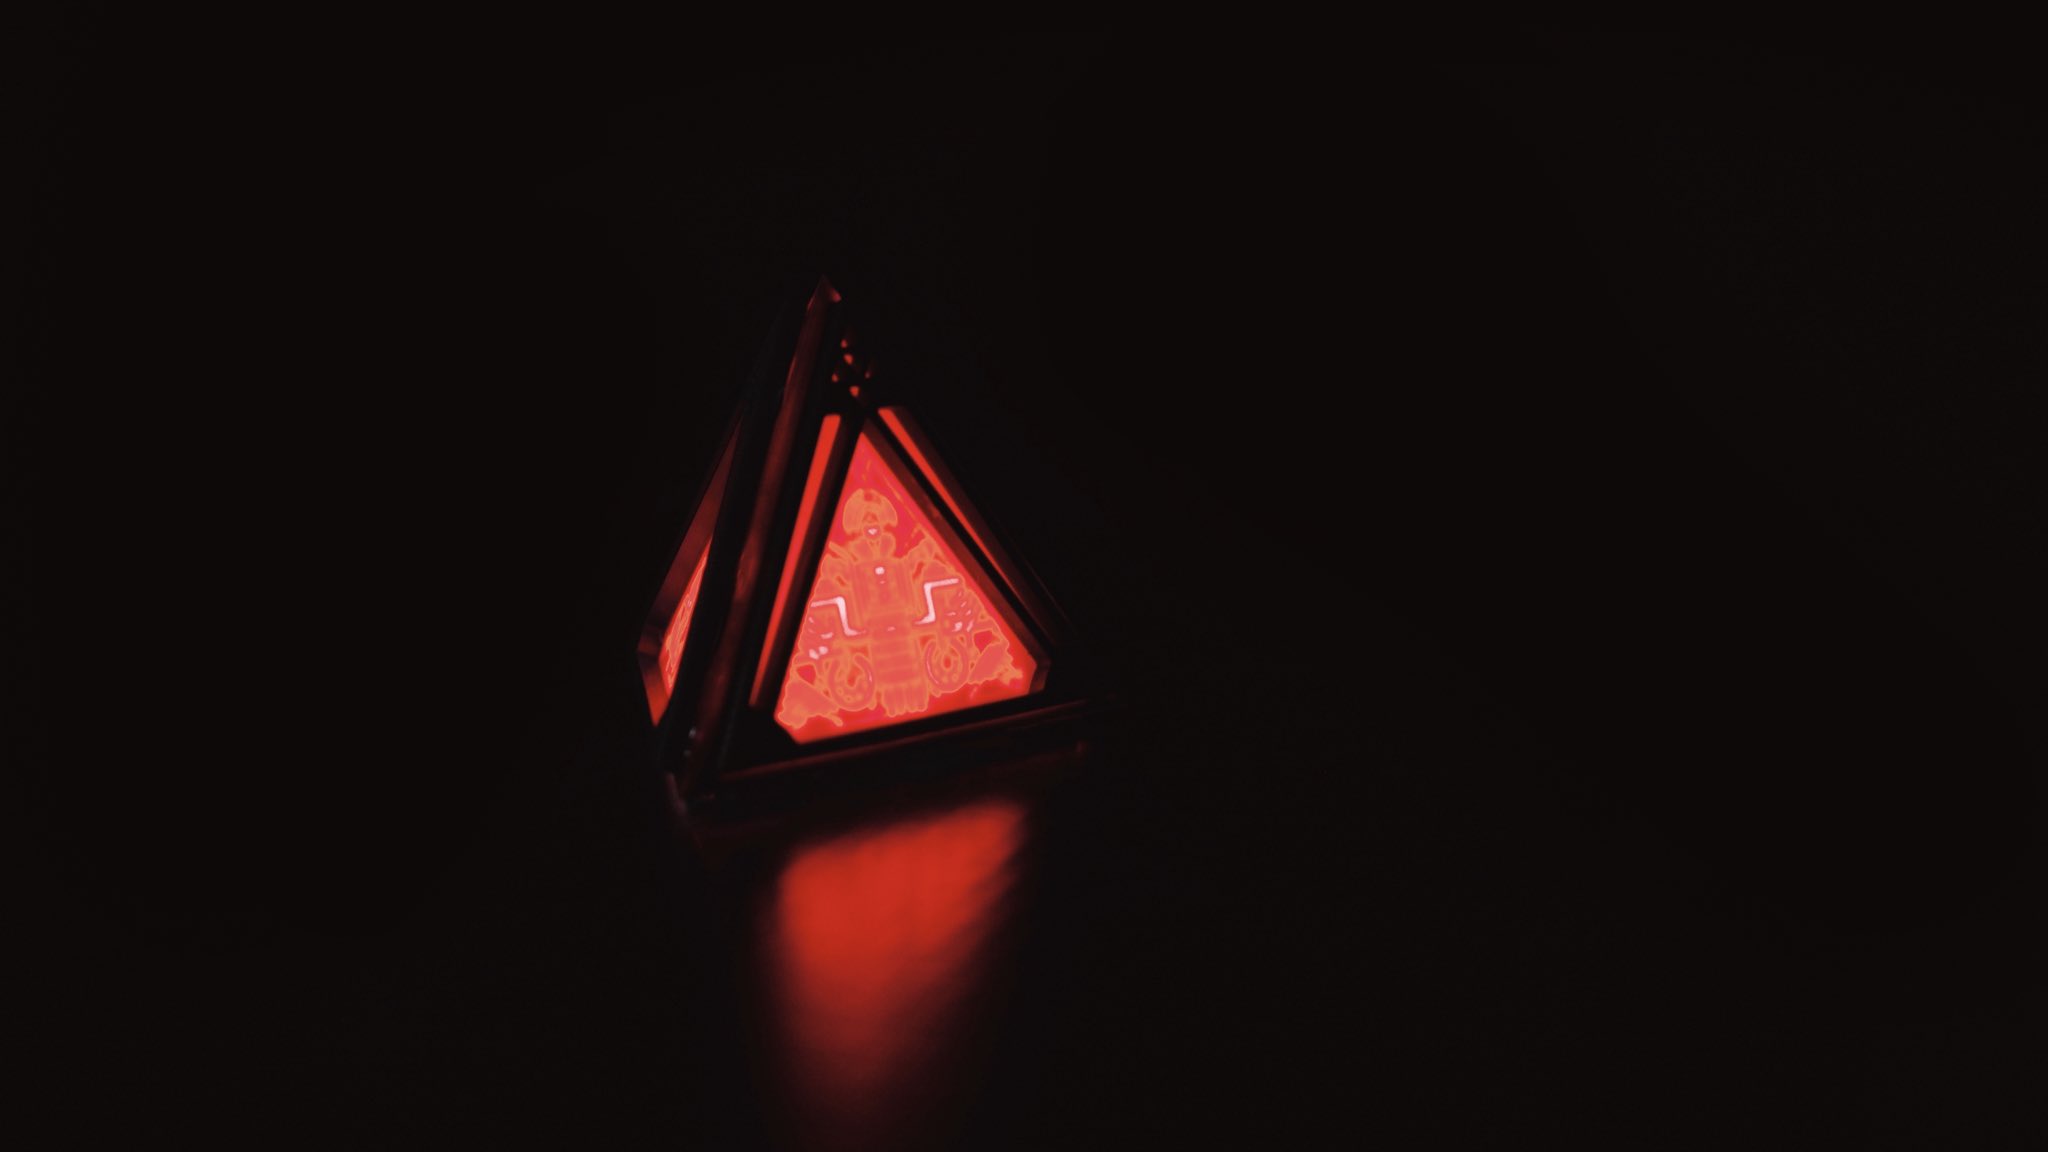 Cinematic Captures got this neat little Sith Holocron for my desk